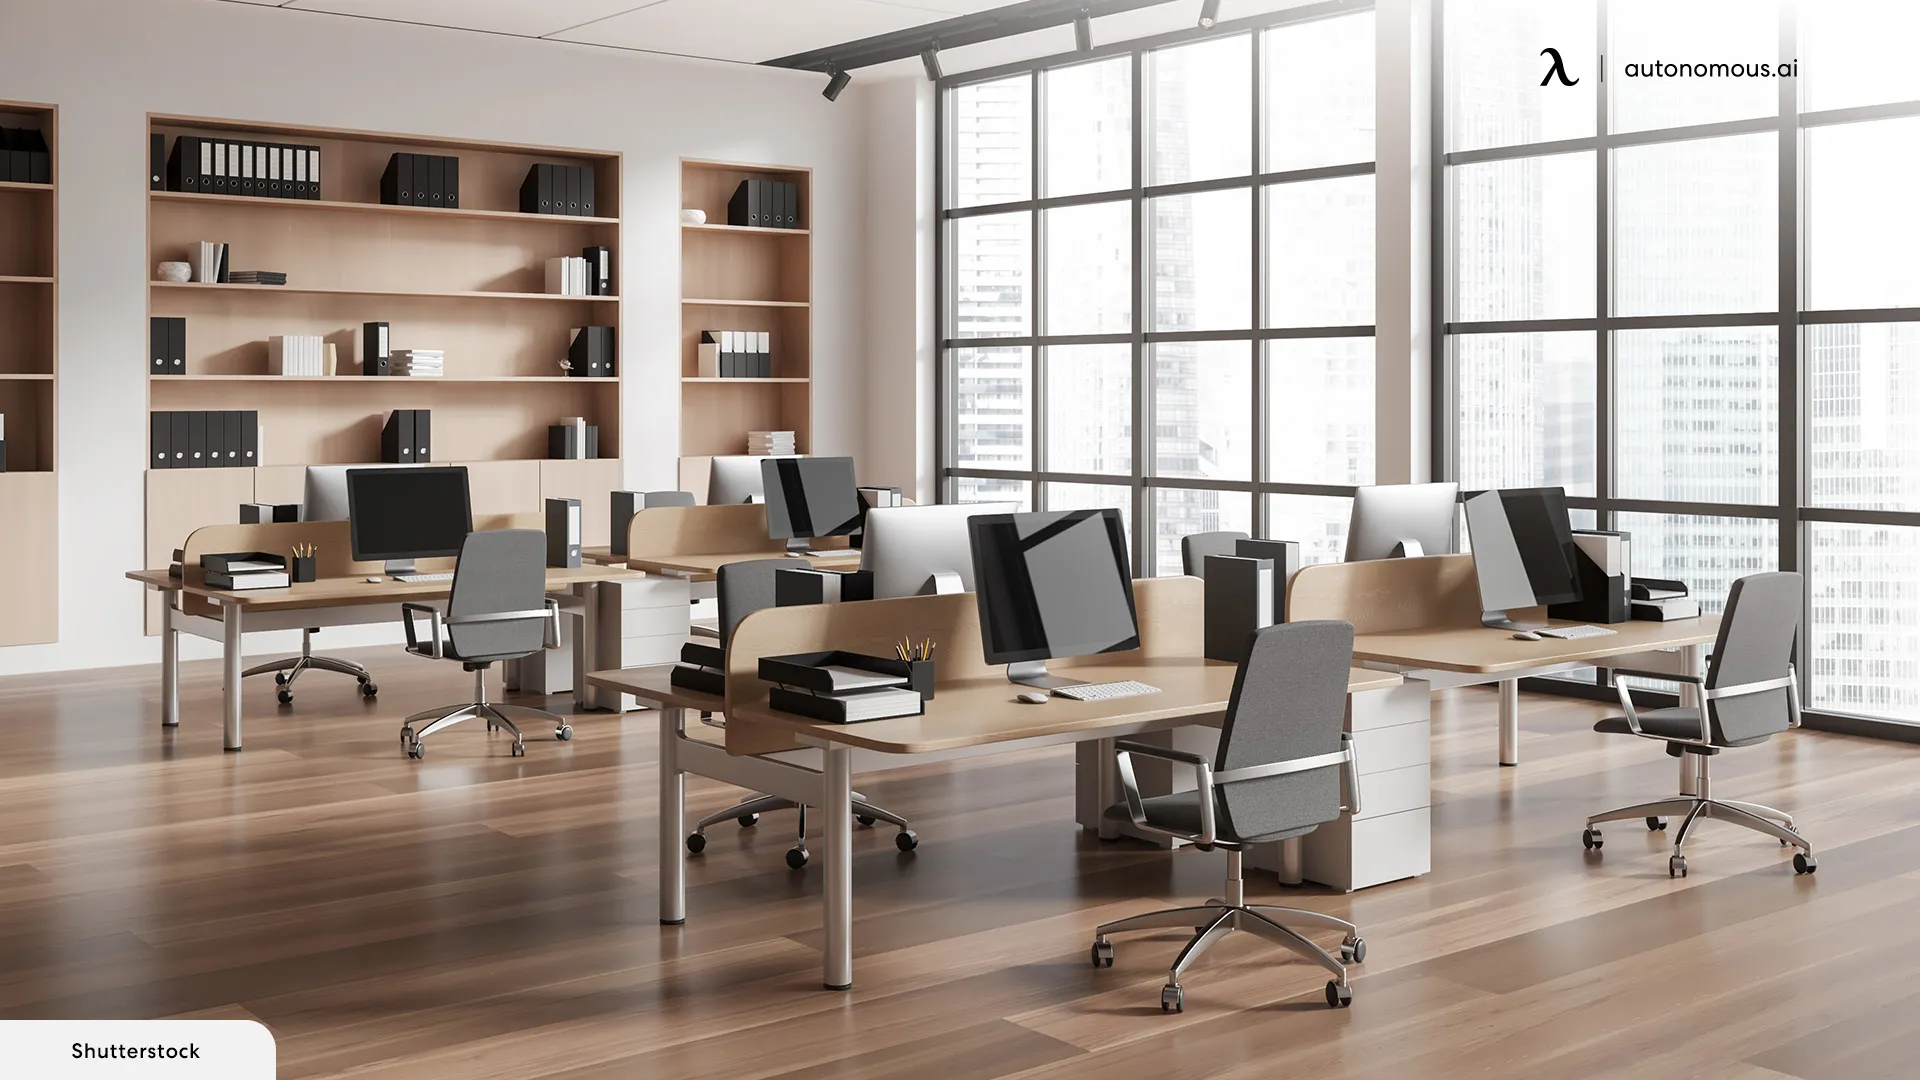 The Office Room (and Other Spaces) Every Business Should Have